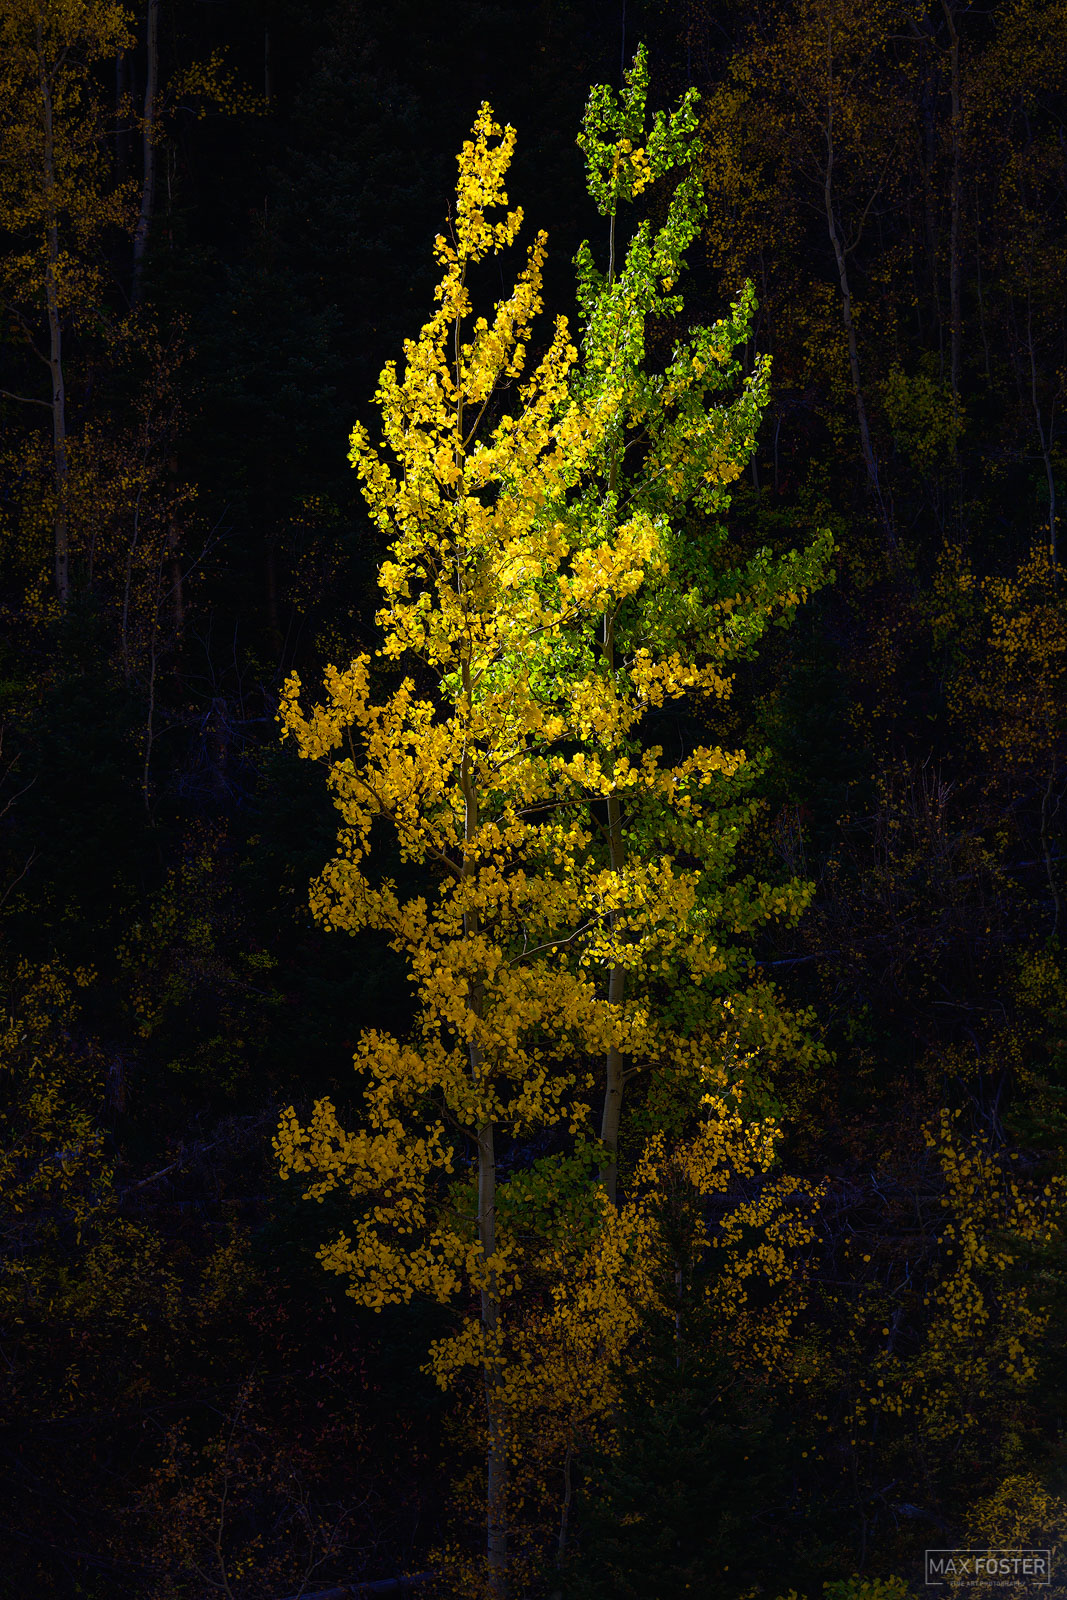 Refresh your space with Entwined, Max Foster's limited edition photography print of an Aspen tree in Colorado from his Autumn...